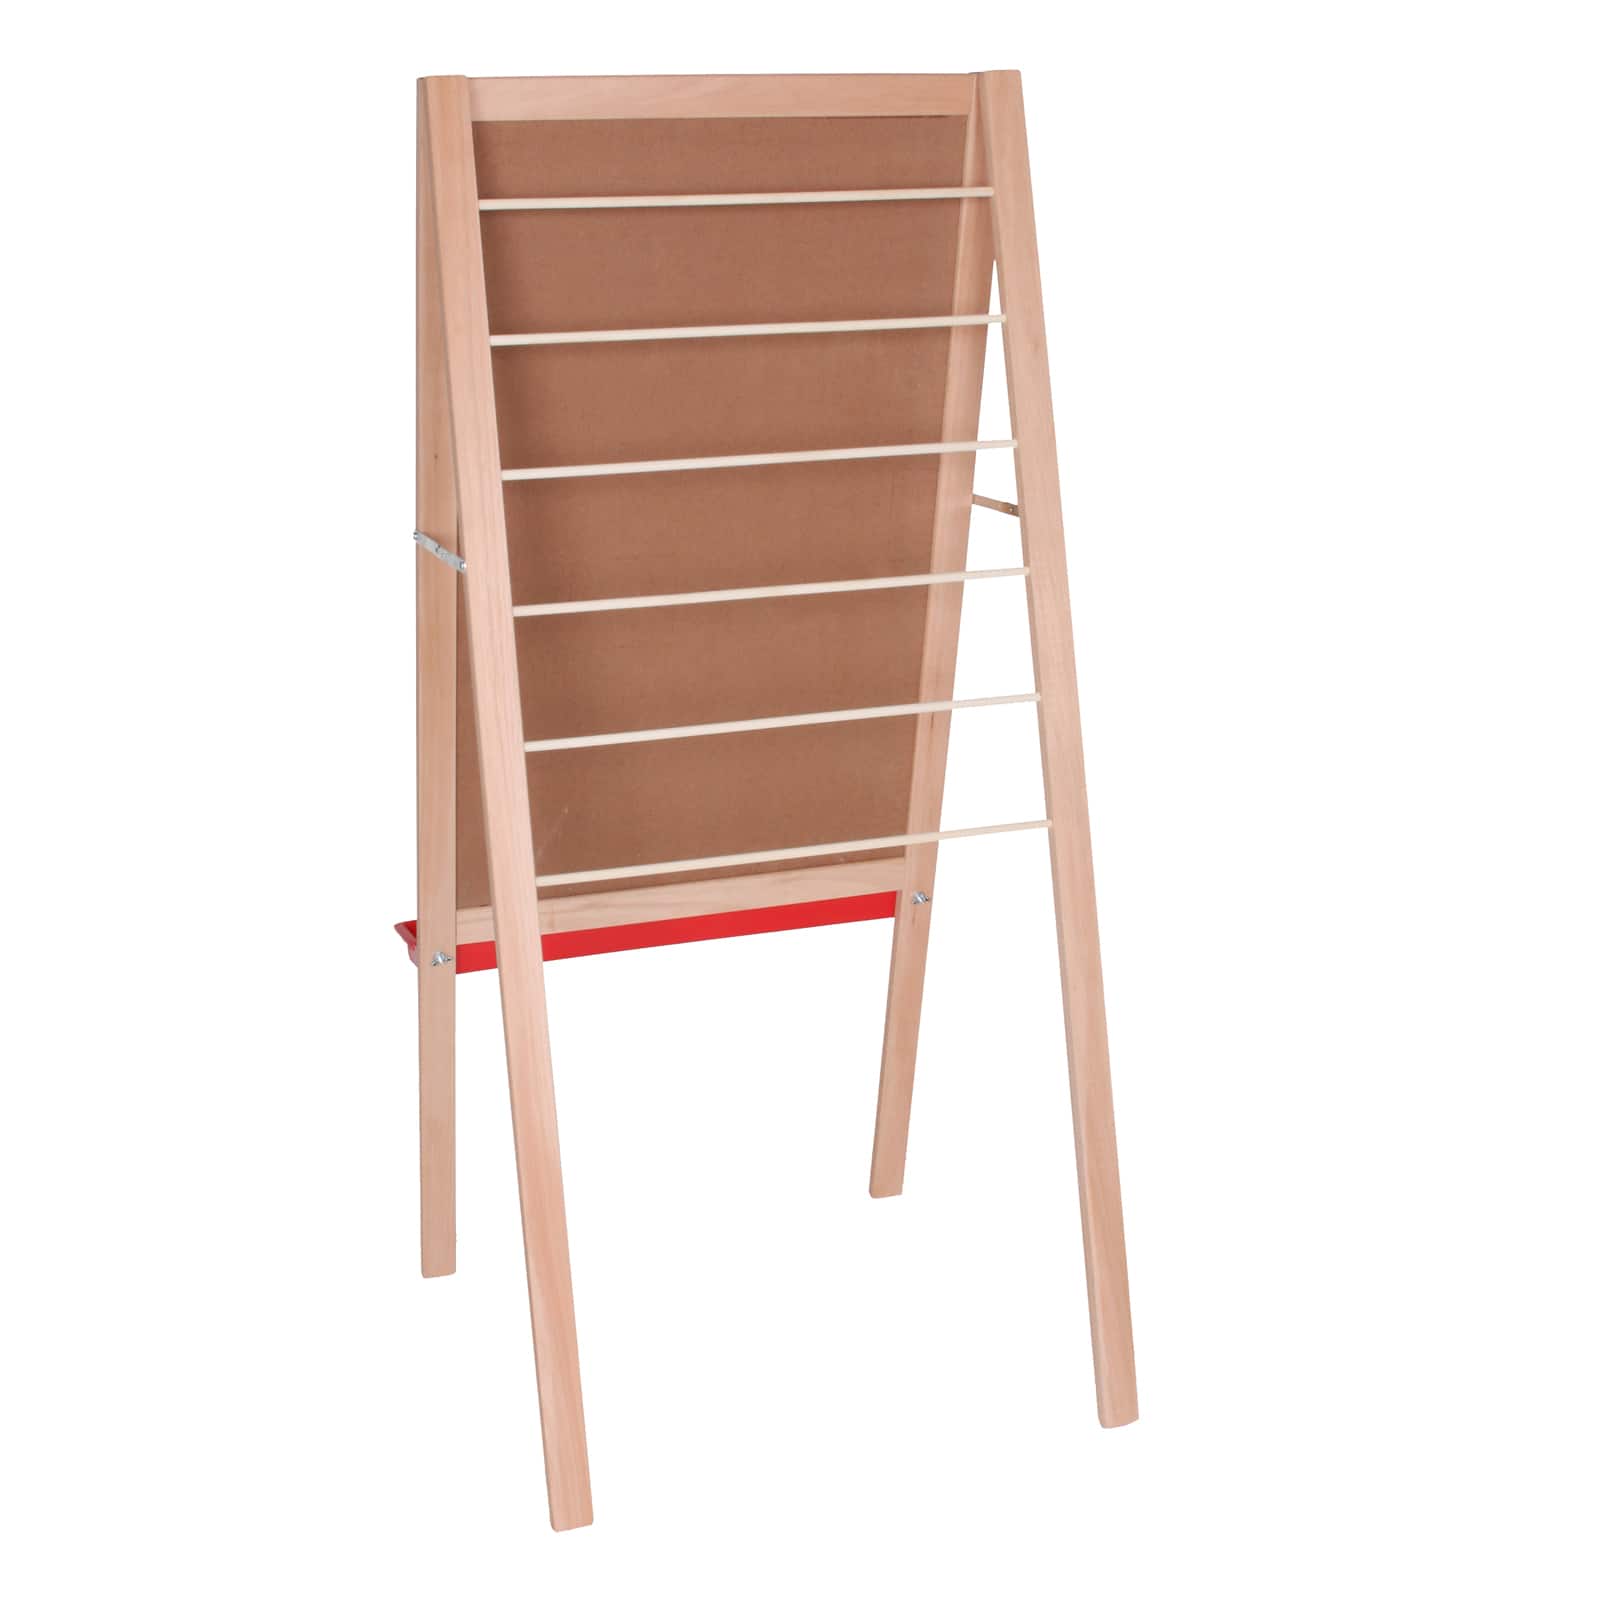 Crestline Classroom Painting Easel, 54&#x22; x 24&#x22;